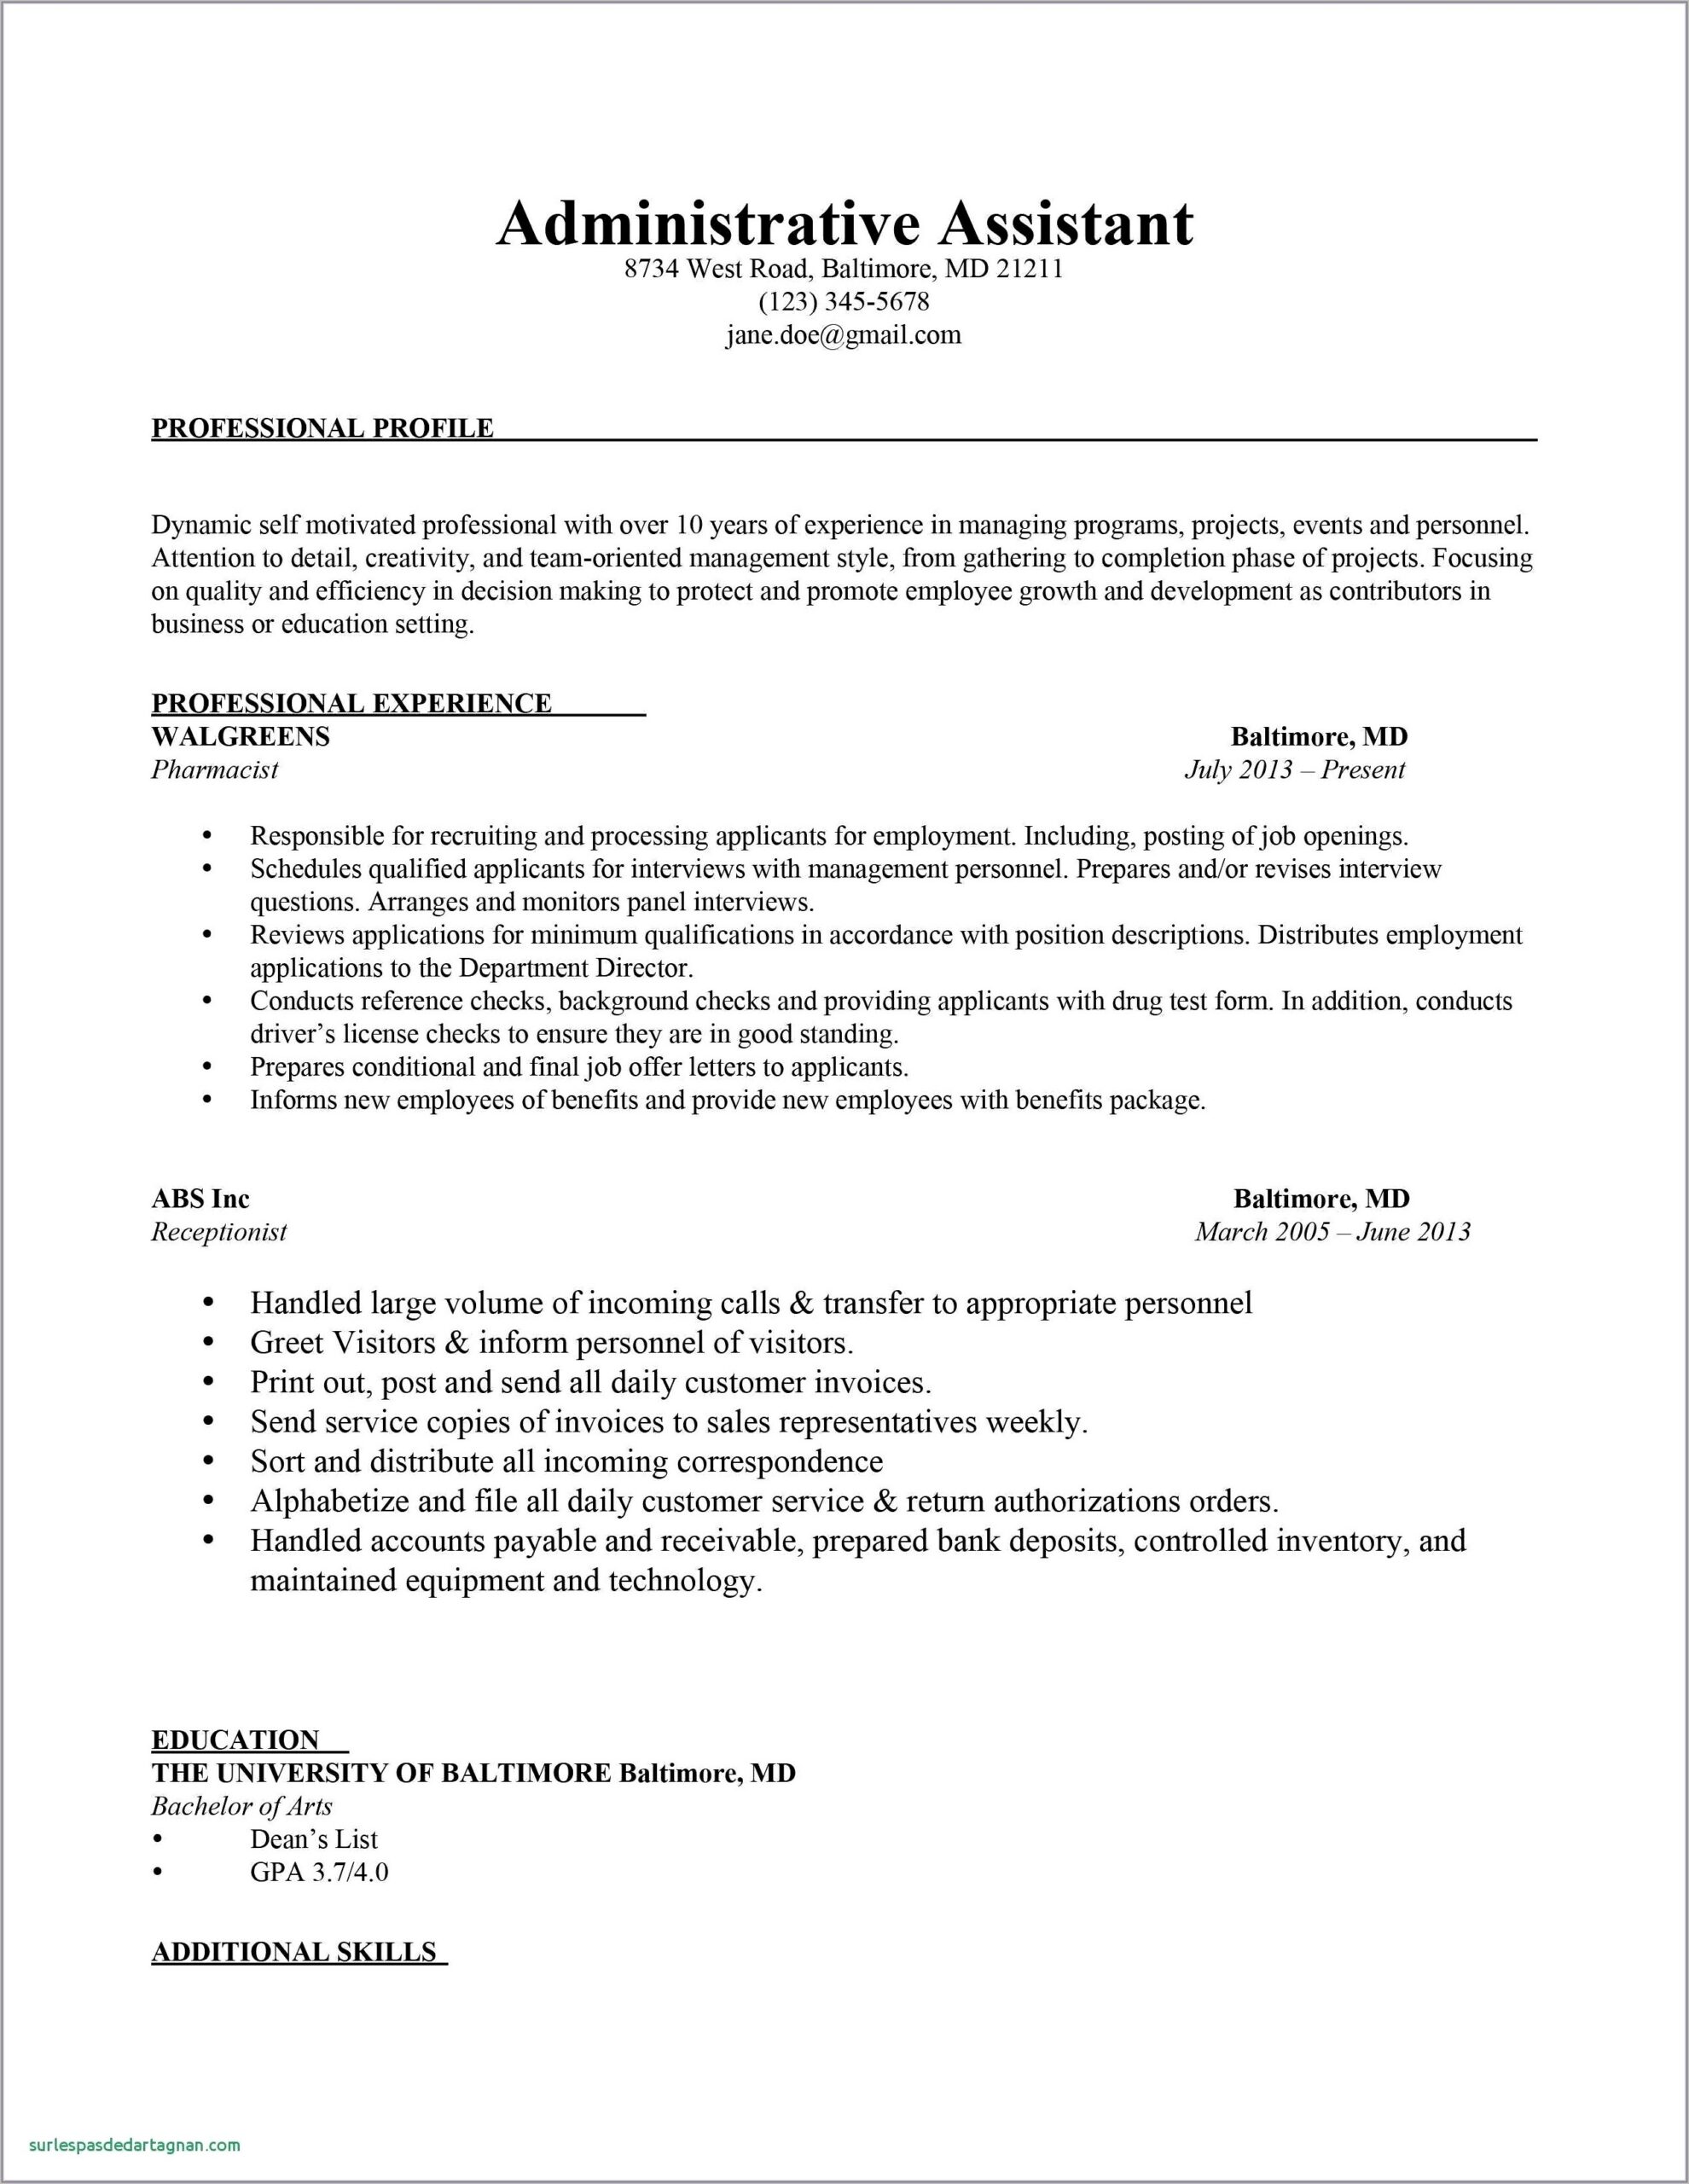 Sample Resumes For Administrative Assistant Jobs Resume Restiumani